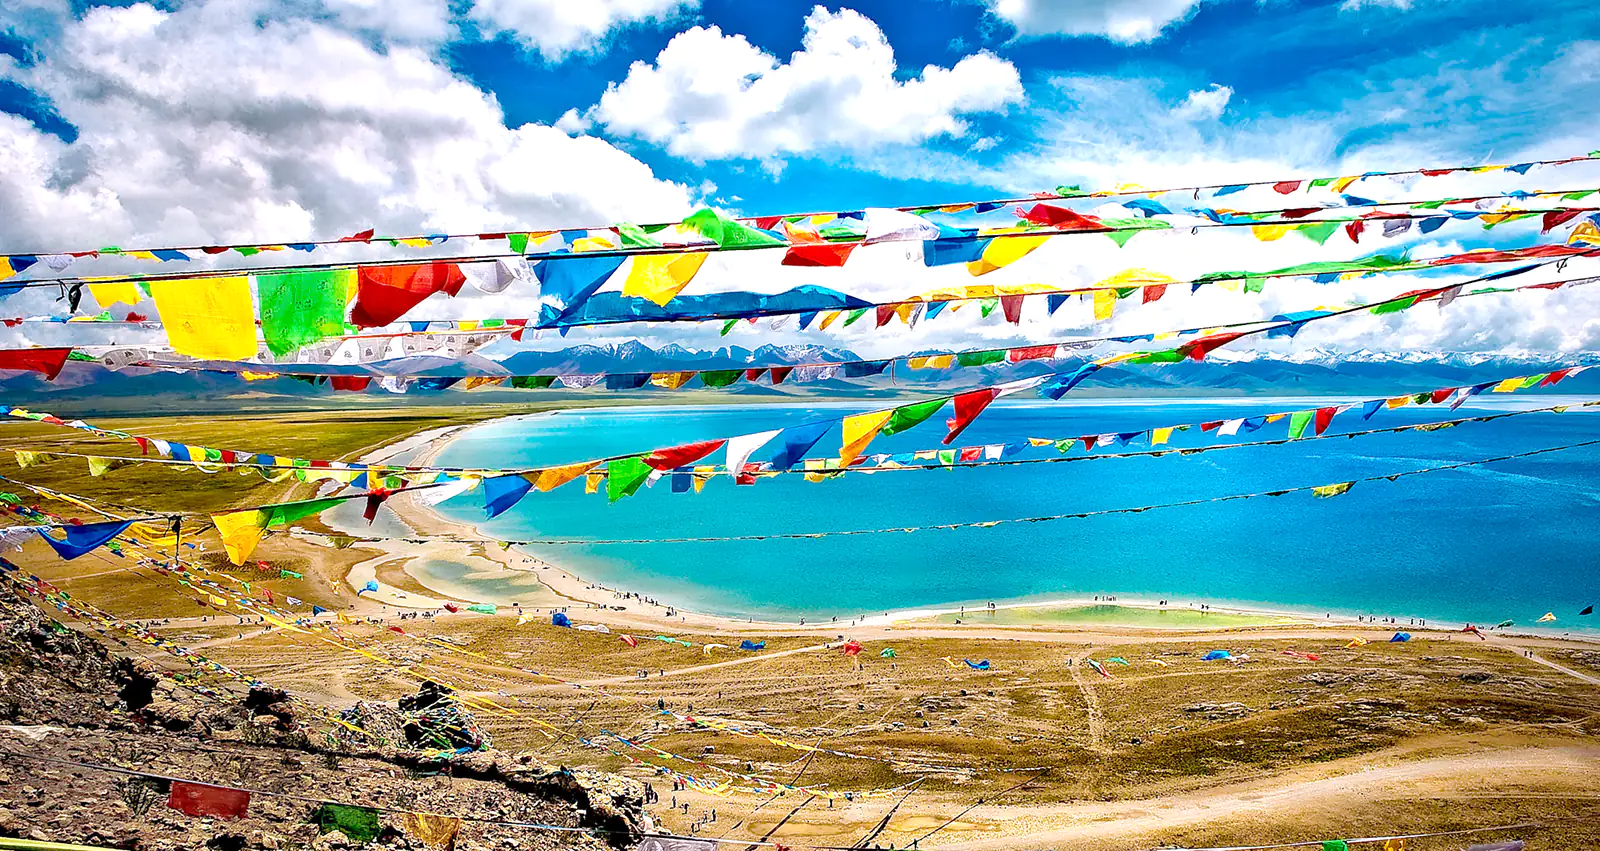 One of the crossings, Laken La Pass, 5200m, traverses the Nyenchen Tanglha range and offers the first stunning glimpse of Tibet's biggest lake, Namtso Lake, 4720m and 80km long.